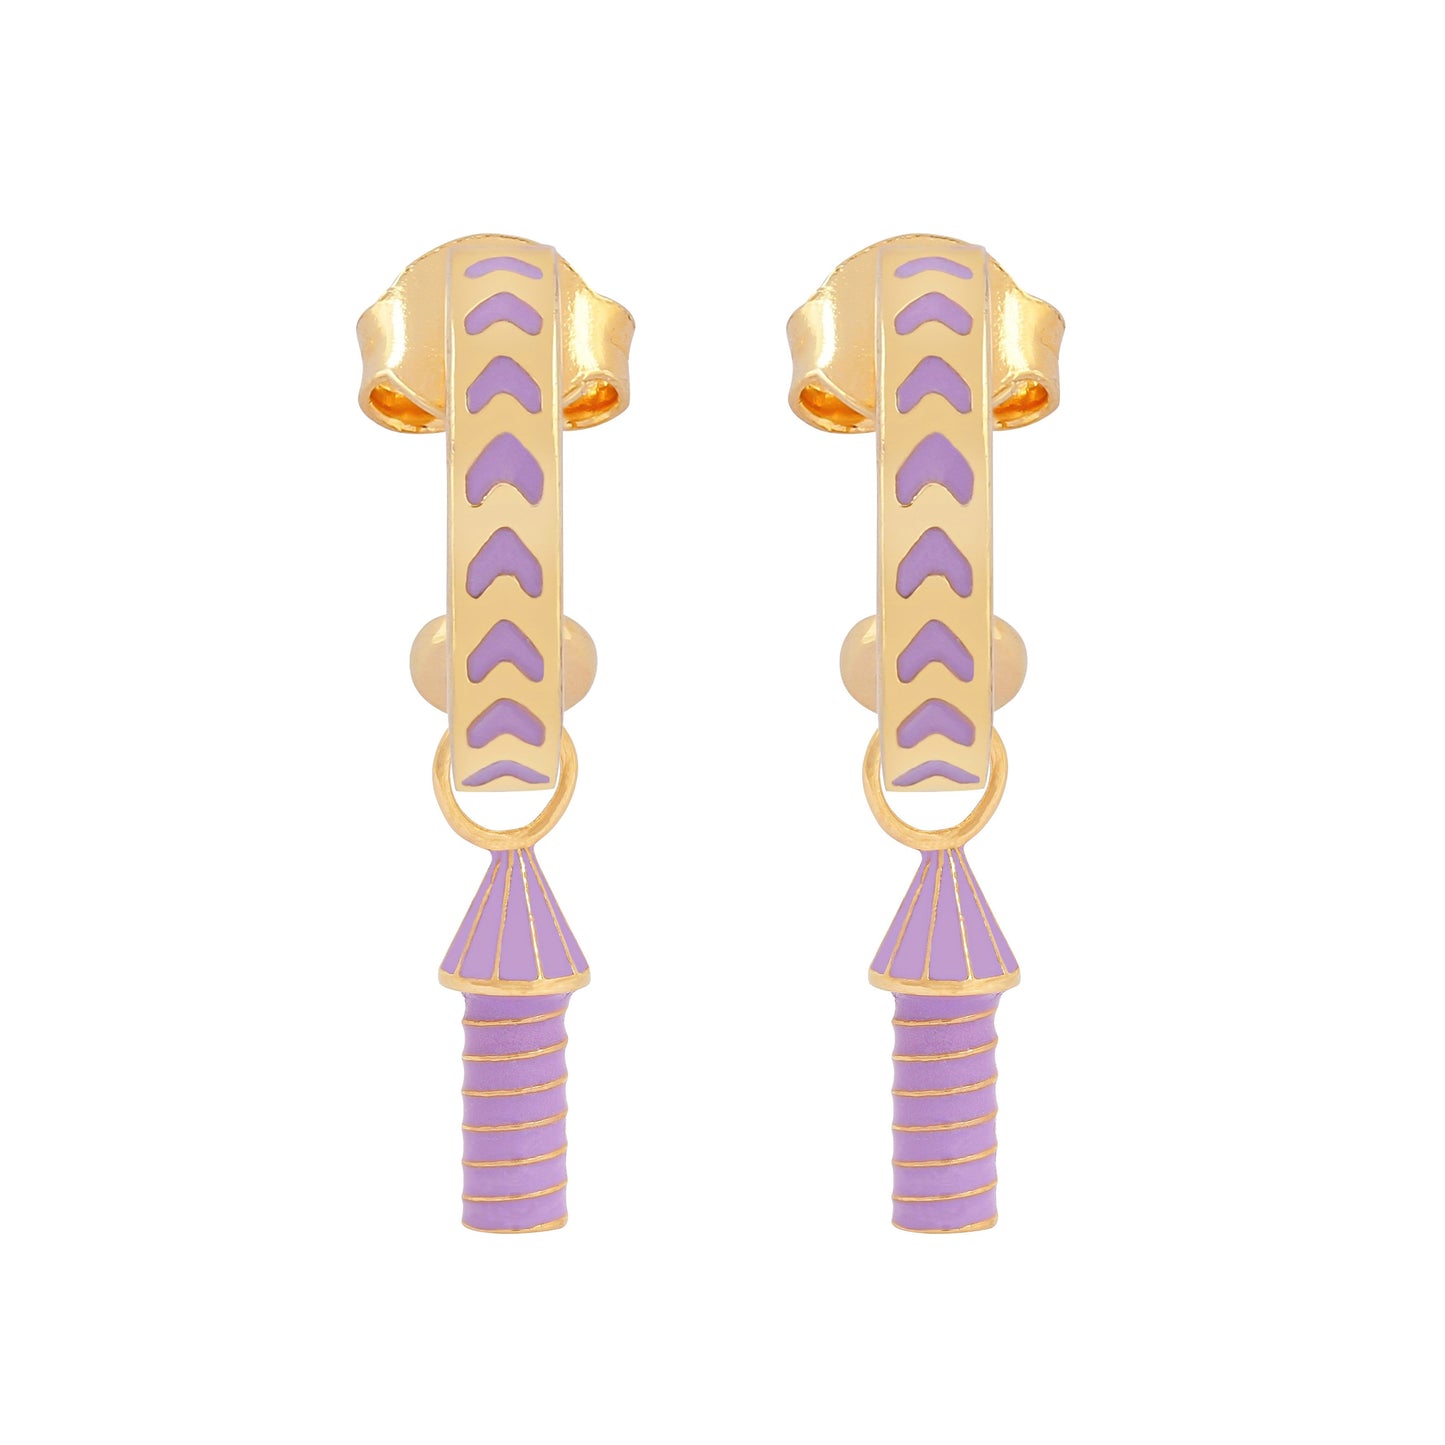 image of rocket enamel earrings in purple and gold on white background